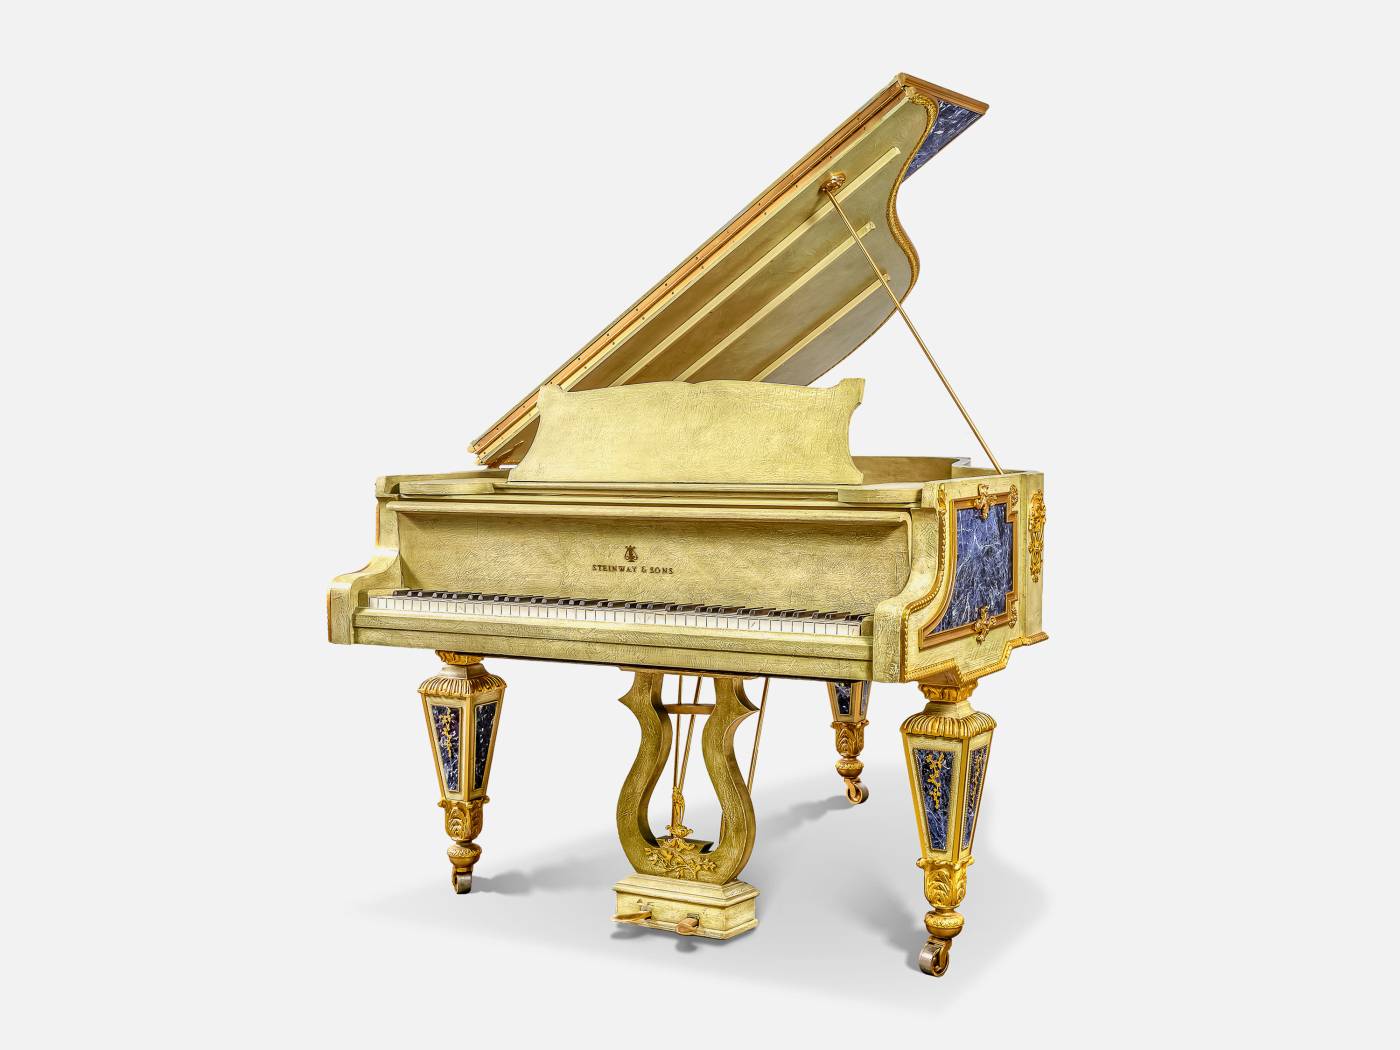 ART. 2706 - C.G. Capelletti quality furniture with made in Italy contemporary Pianos